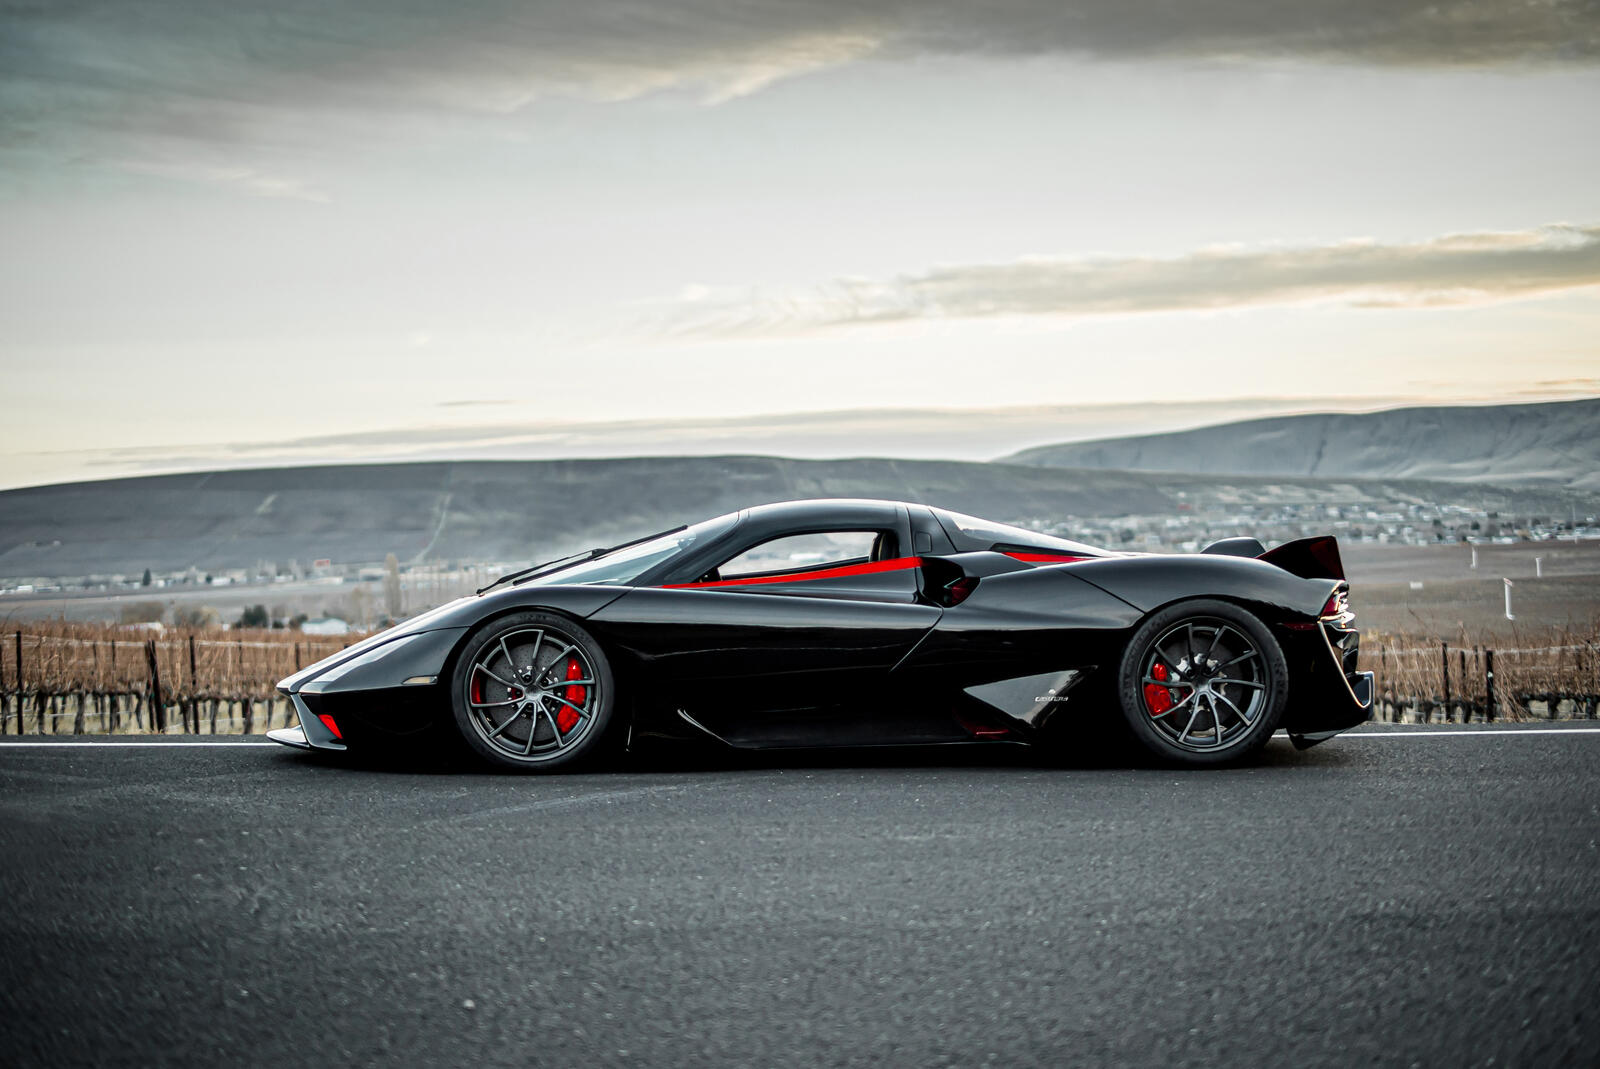 Free photo Black ssc tuatara with red inserts side view